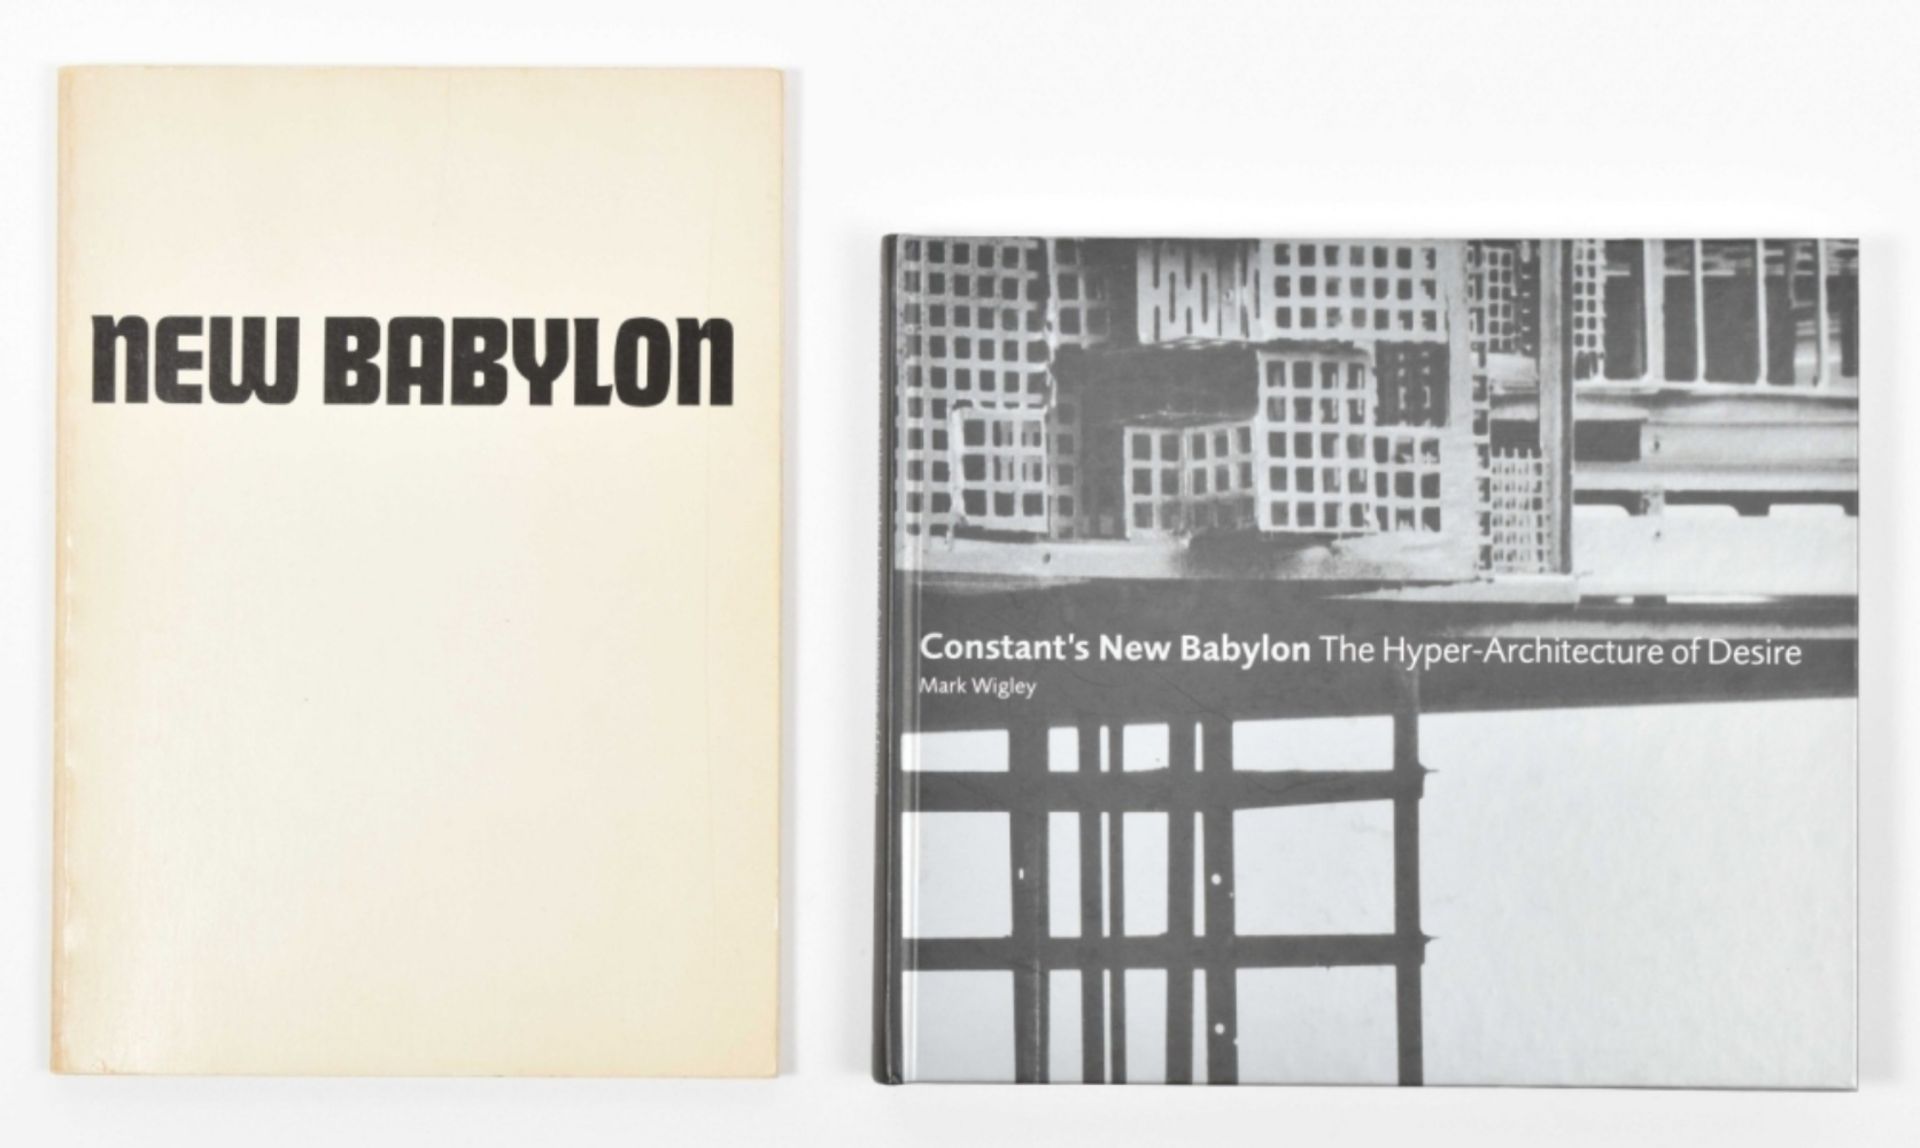 Two publications about Constant's New Babylon